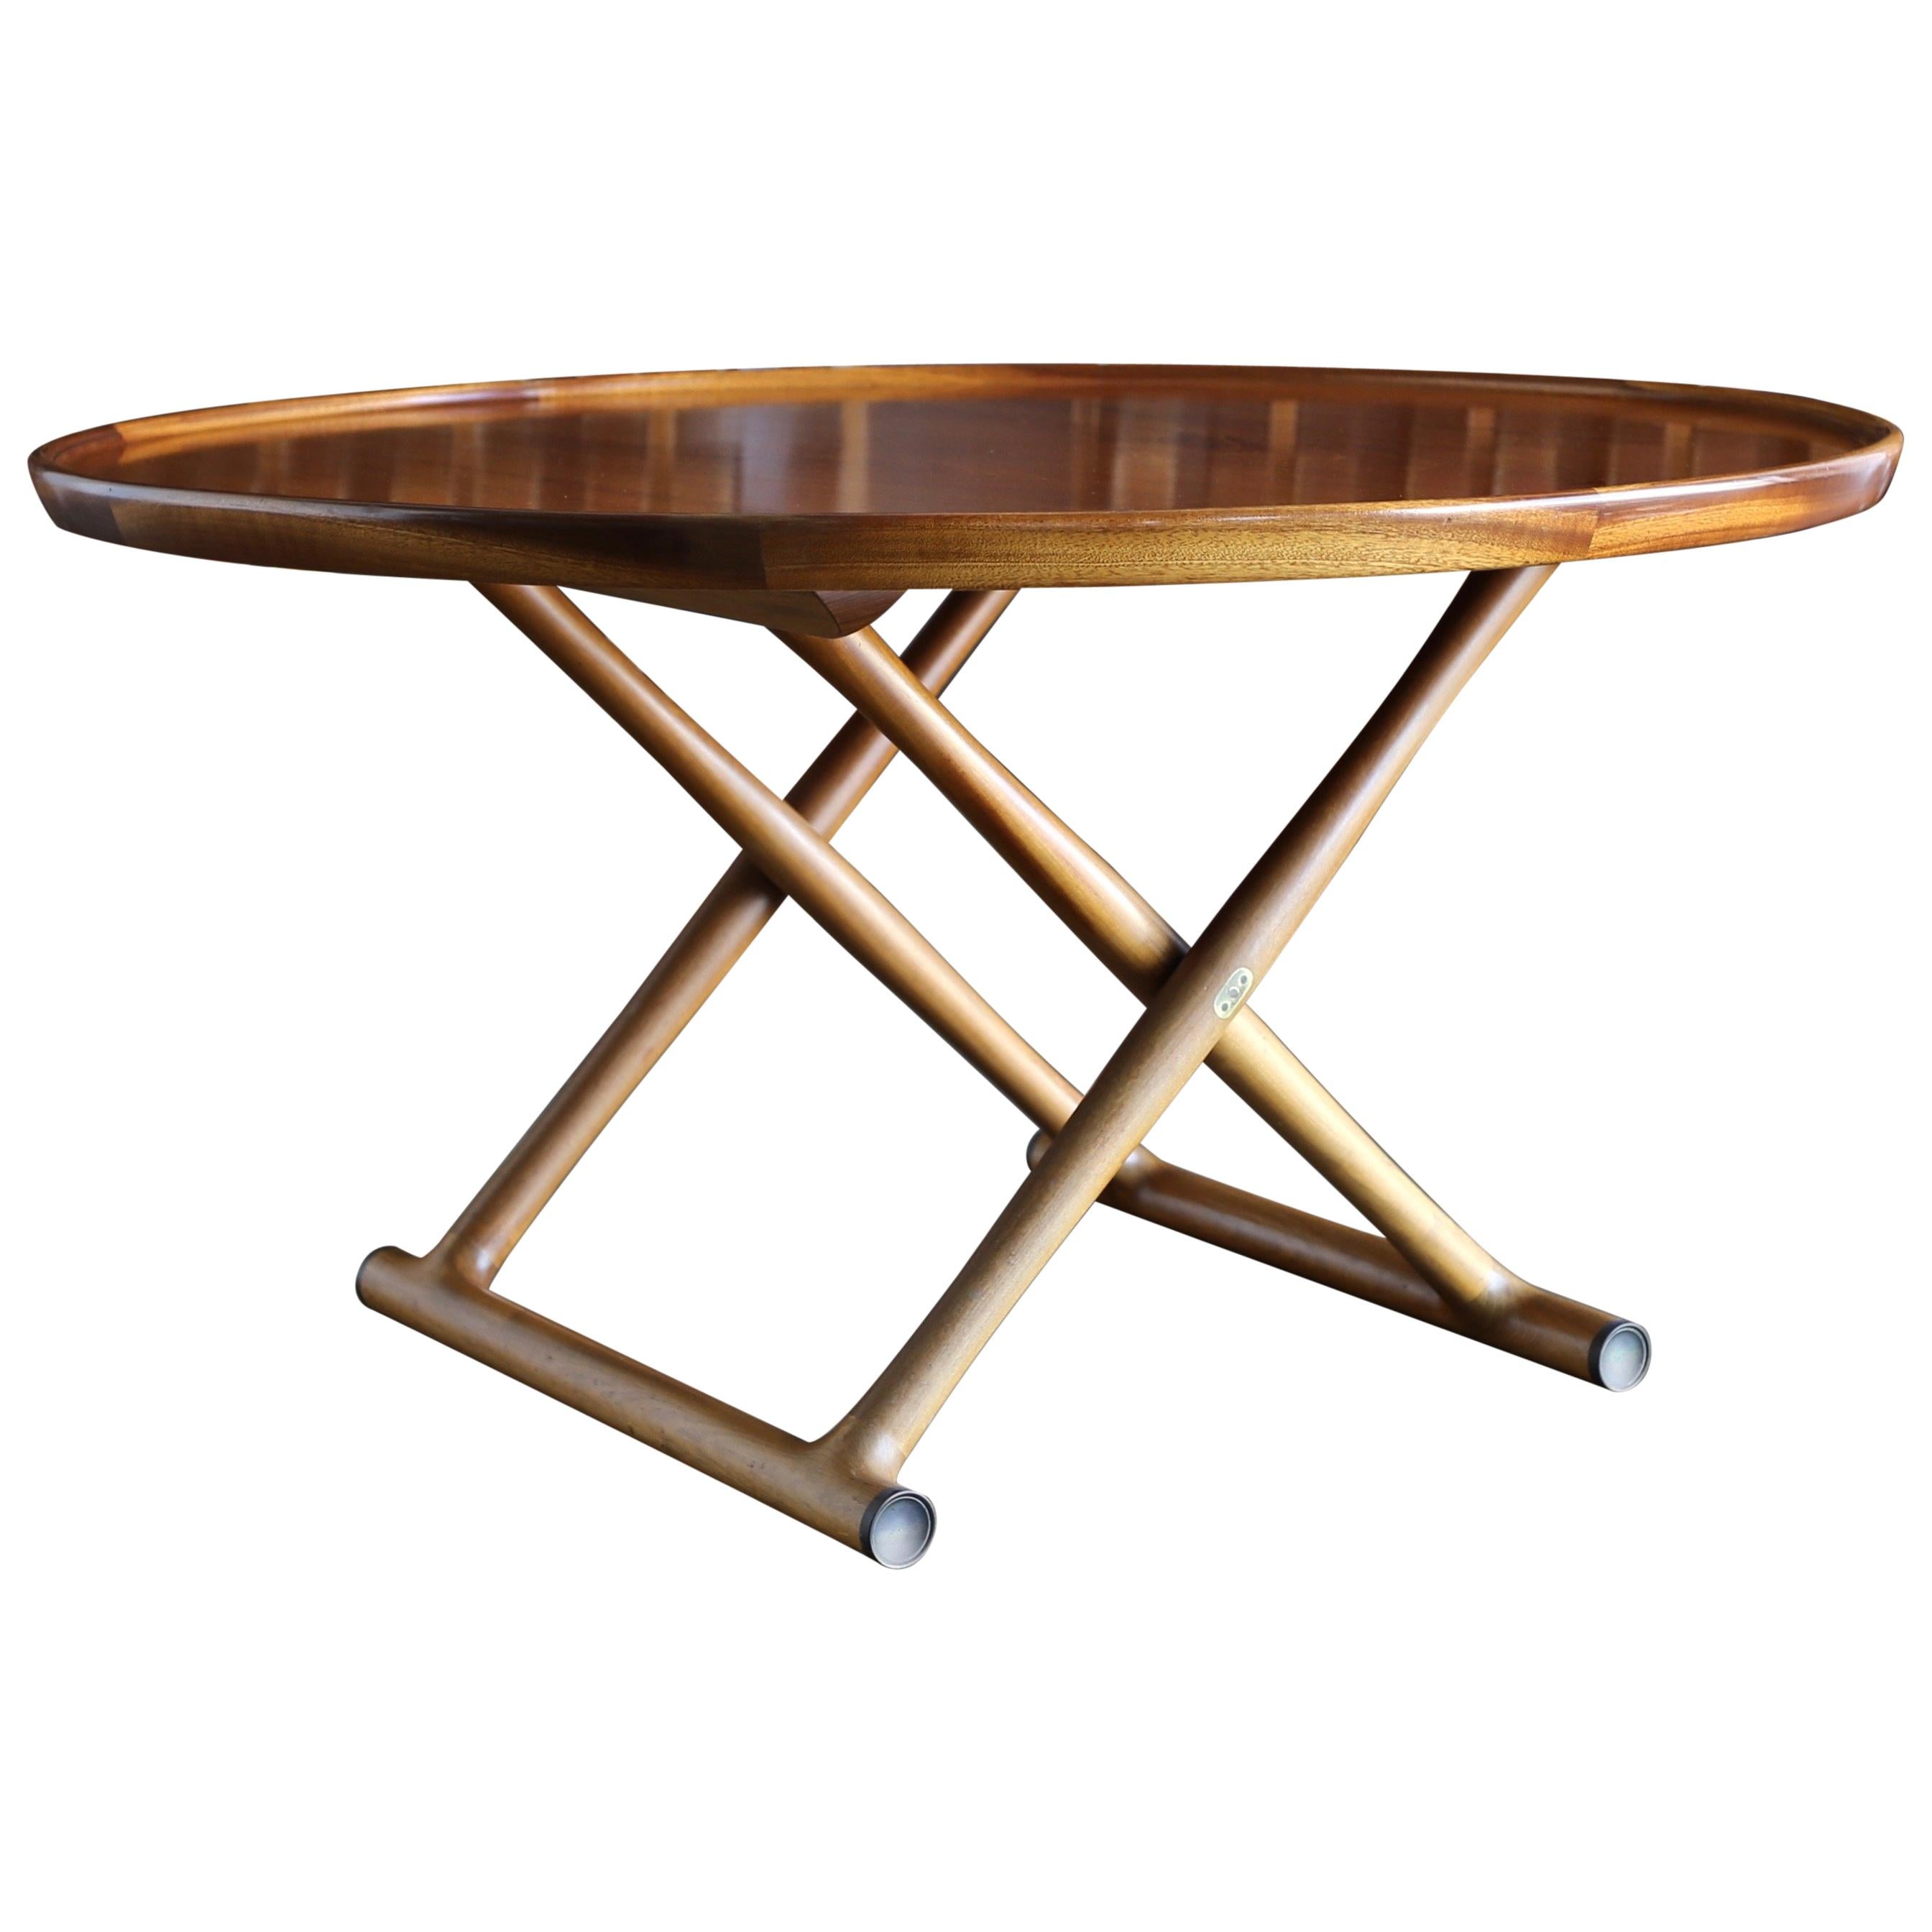 Large Egyptian Table by Mogens Lassen for A.J. Iversen, circa 1955